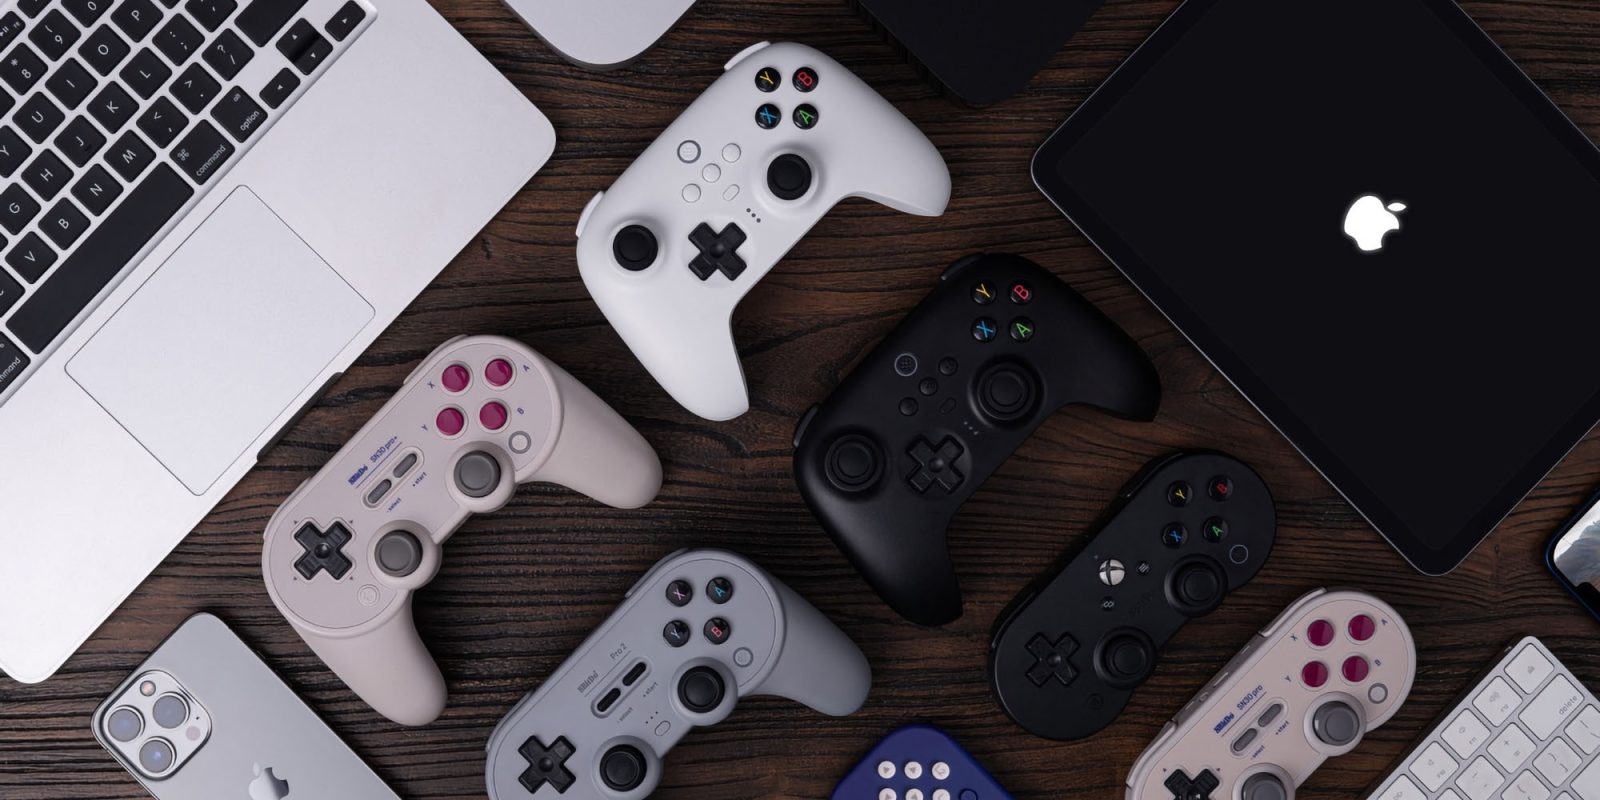 8BitDo game controllers now officially support iPhone, iPad, Mac, and Apple TV